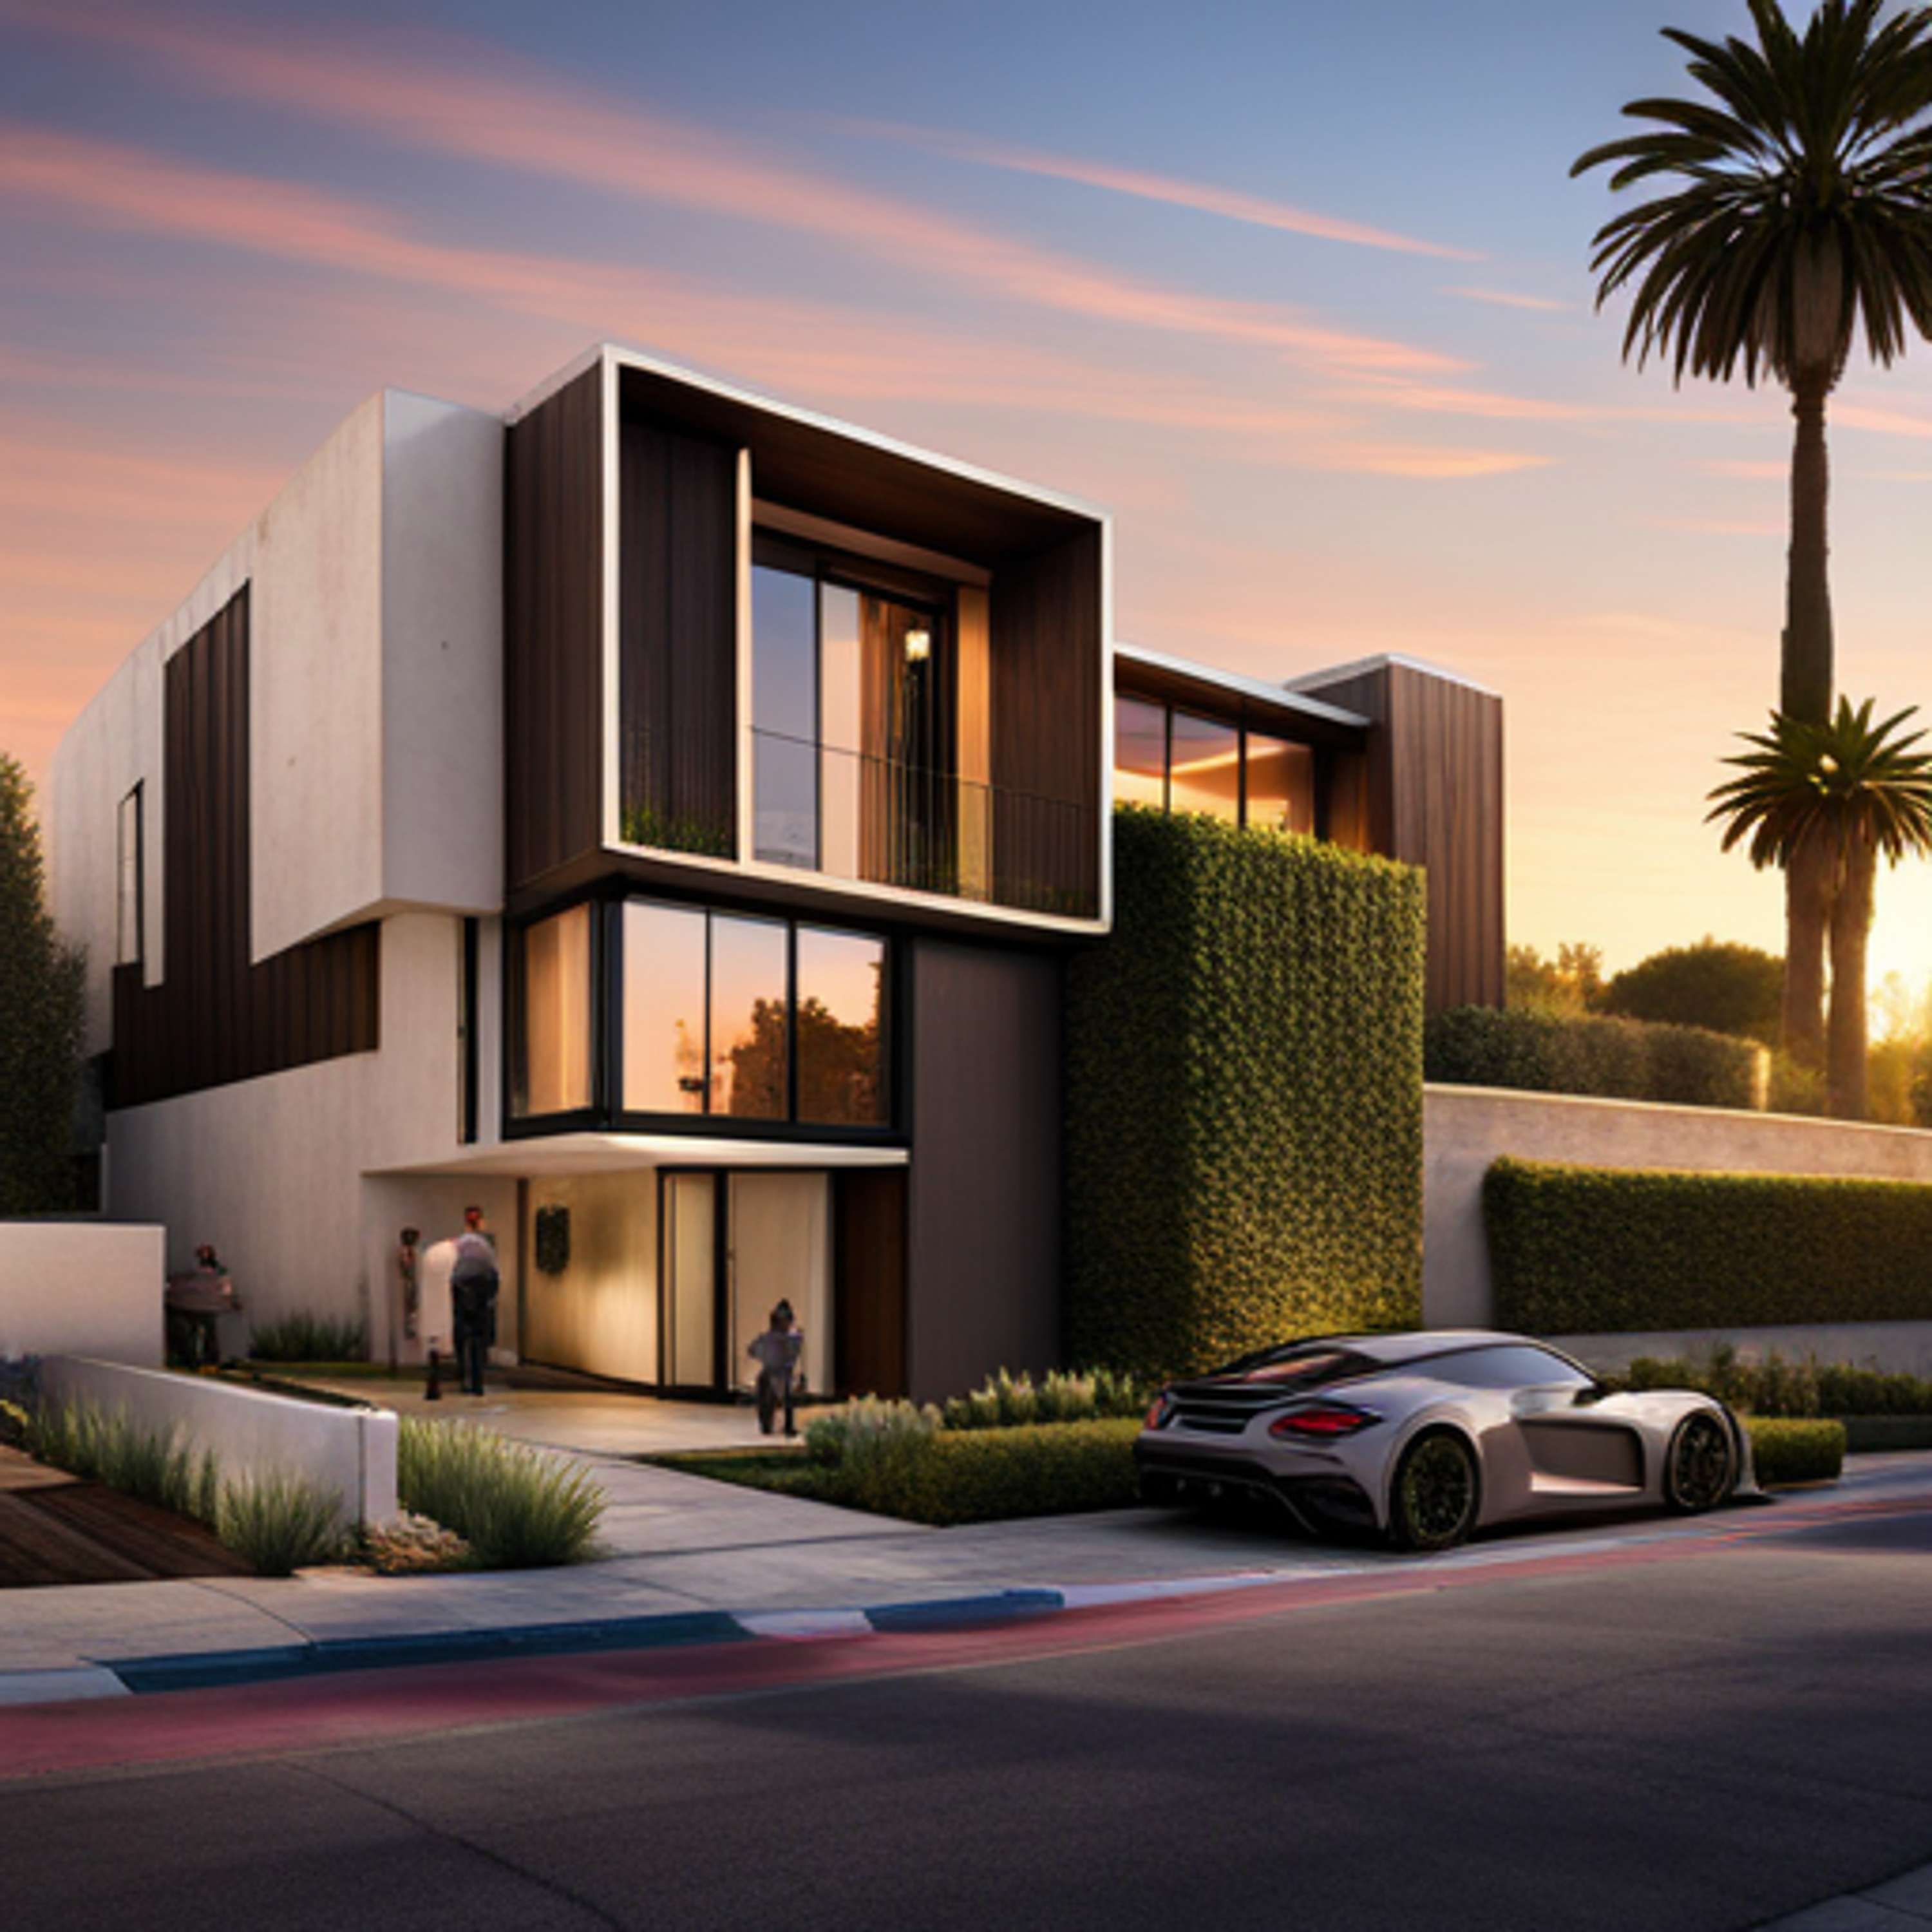 Luxury Living: Explore Encino Houses for Sale and Embrace Prestigious Living